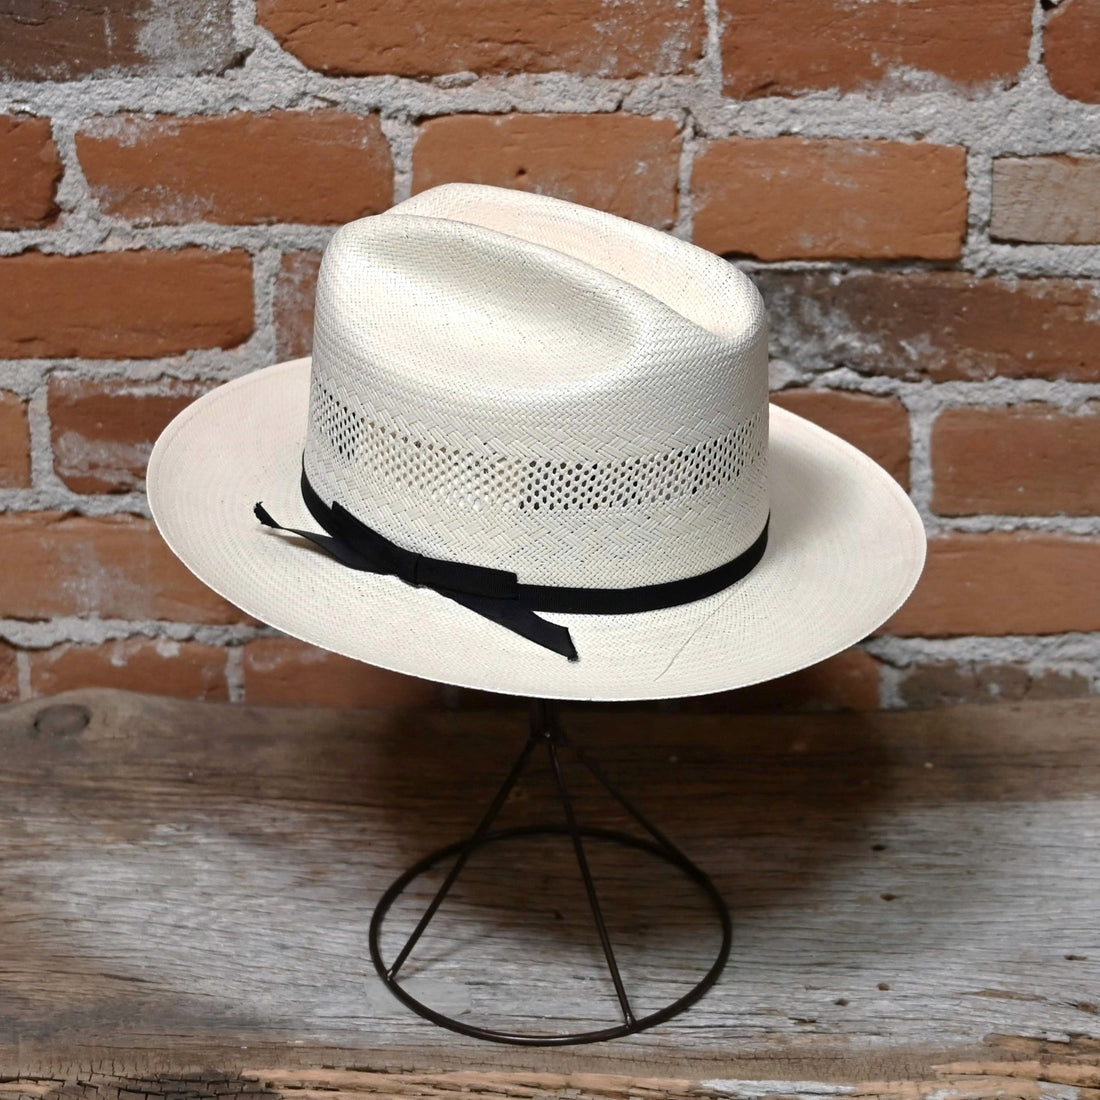 Stetson Open Road Vented